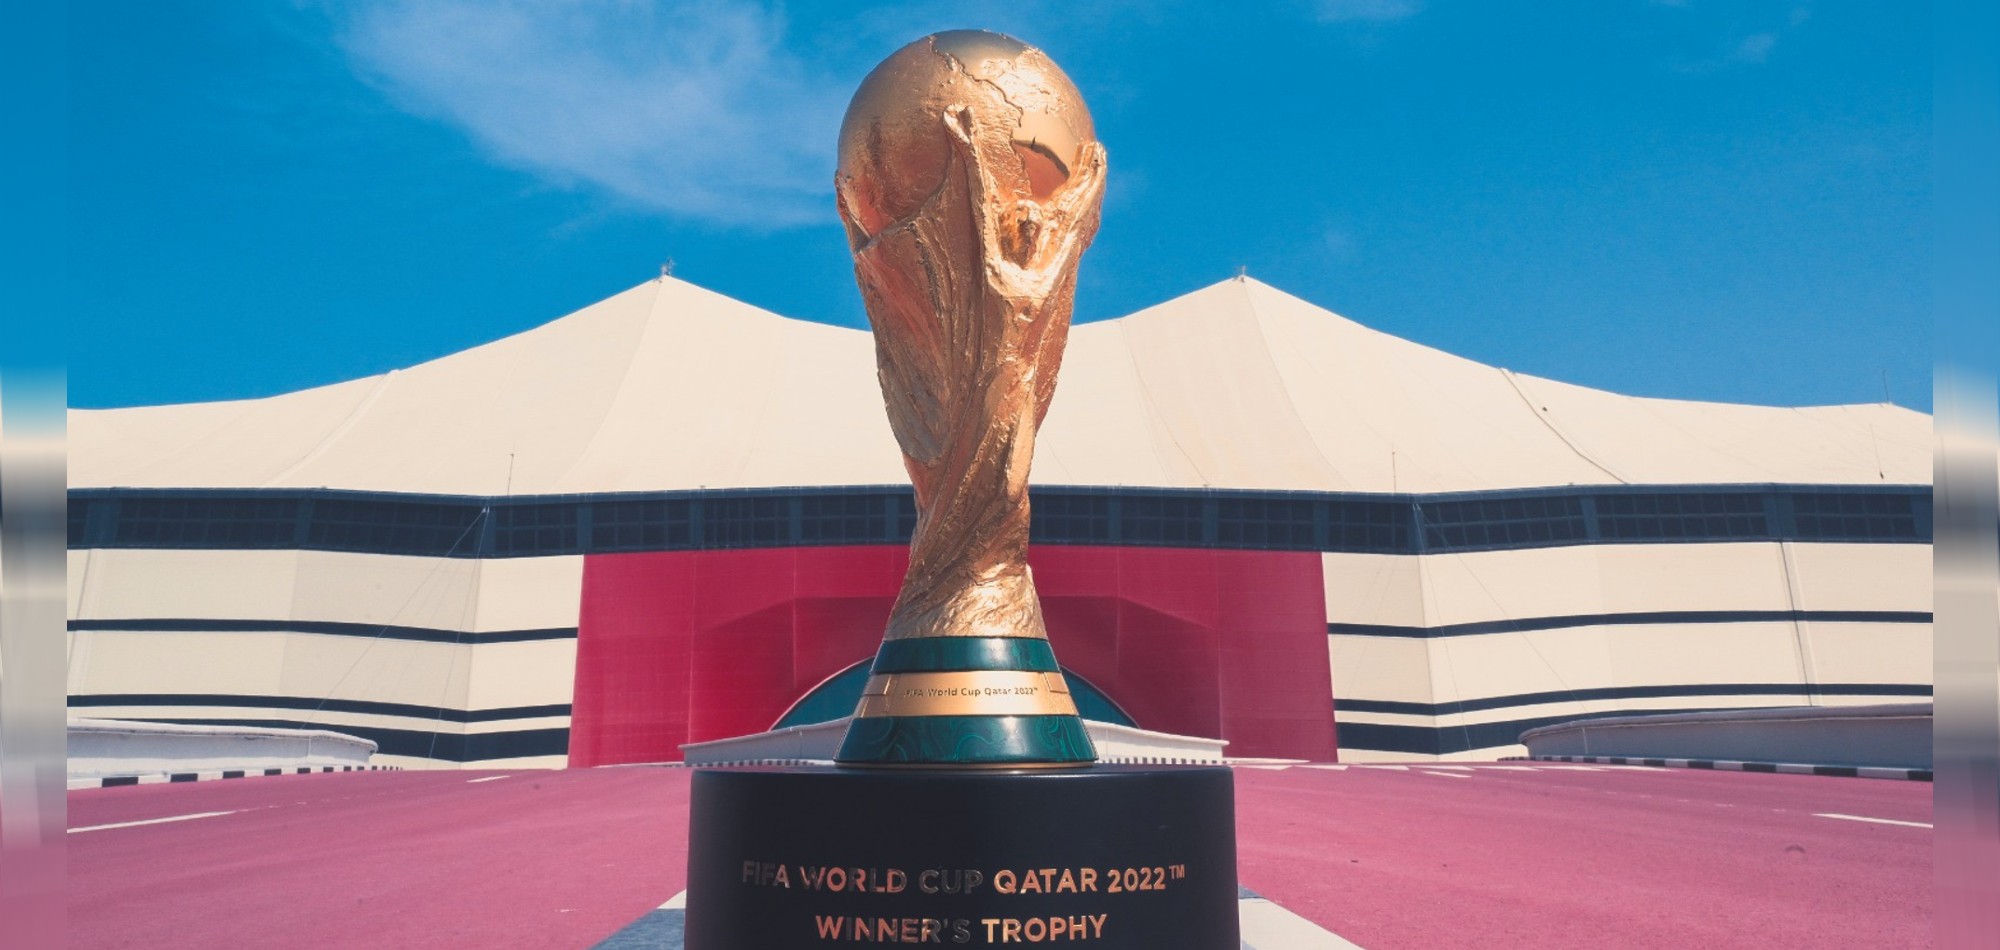 Qatar 2022: one year to go until the first FIFA World Cup™ in the Middle East and Arab world